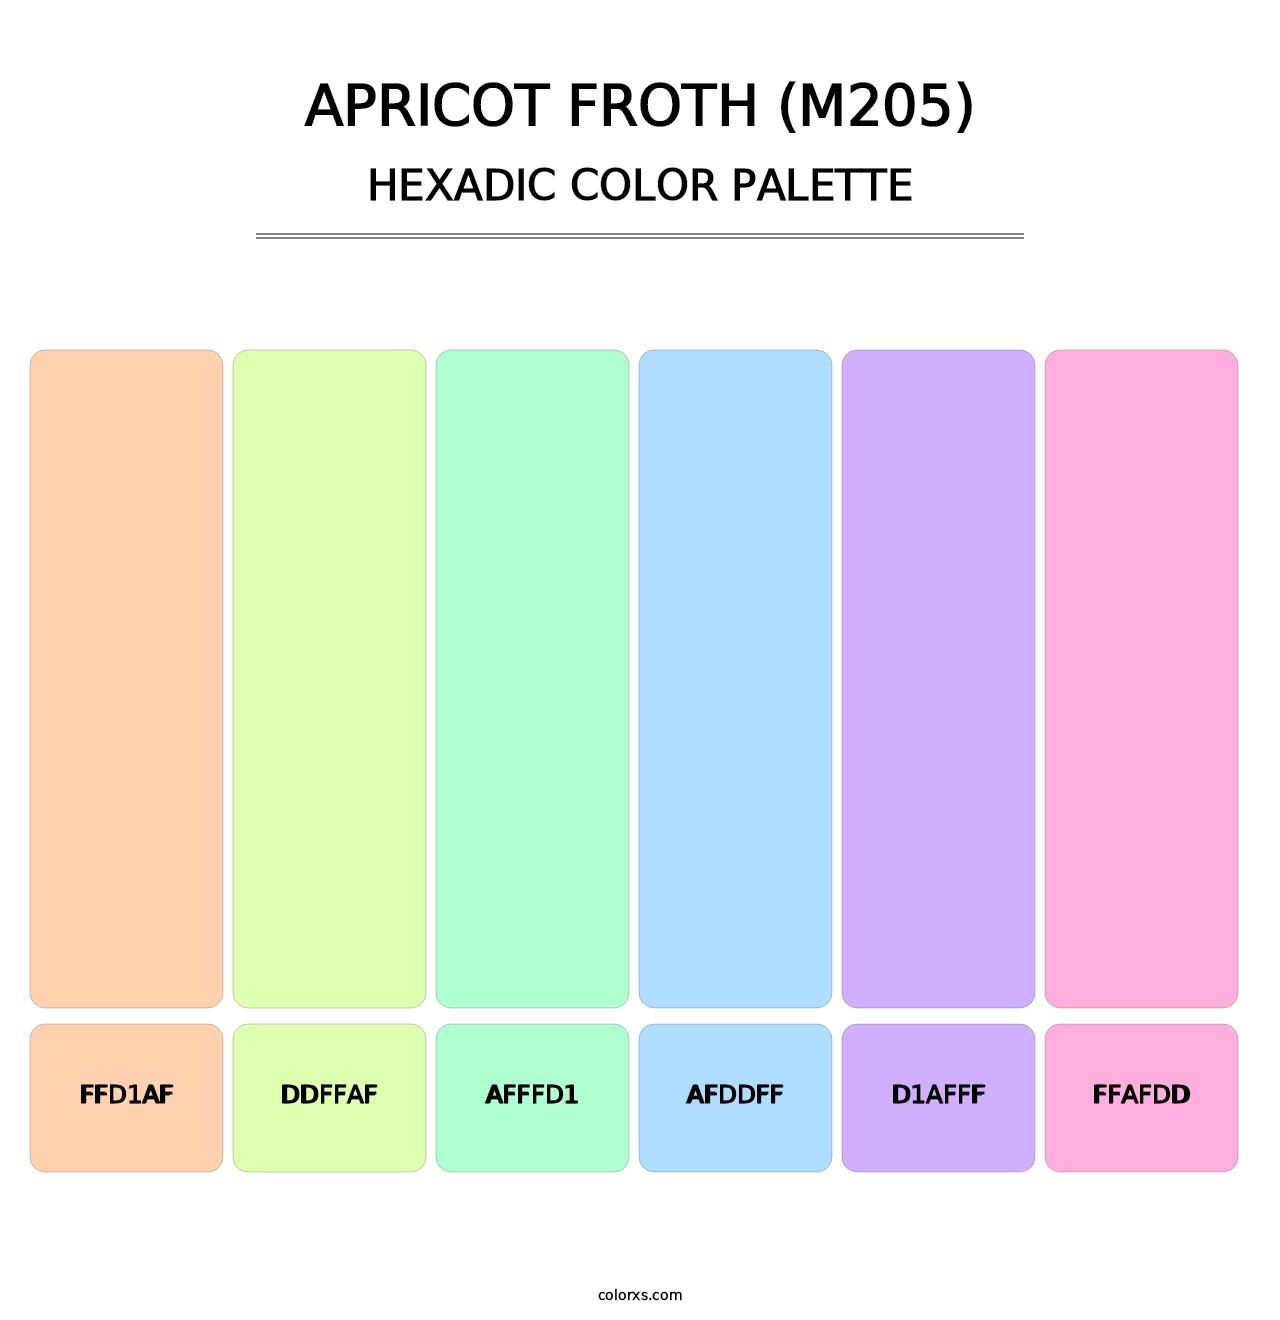 Apricot Froth (M205) - Hexadic Color Palette